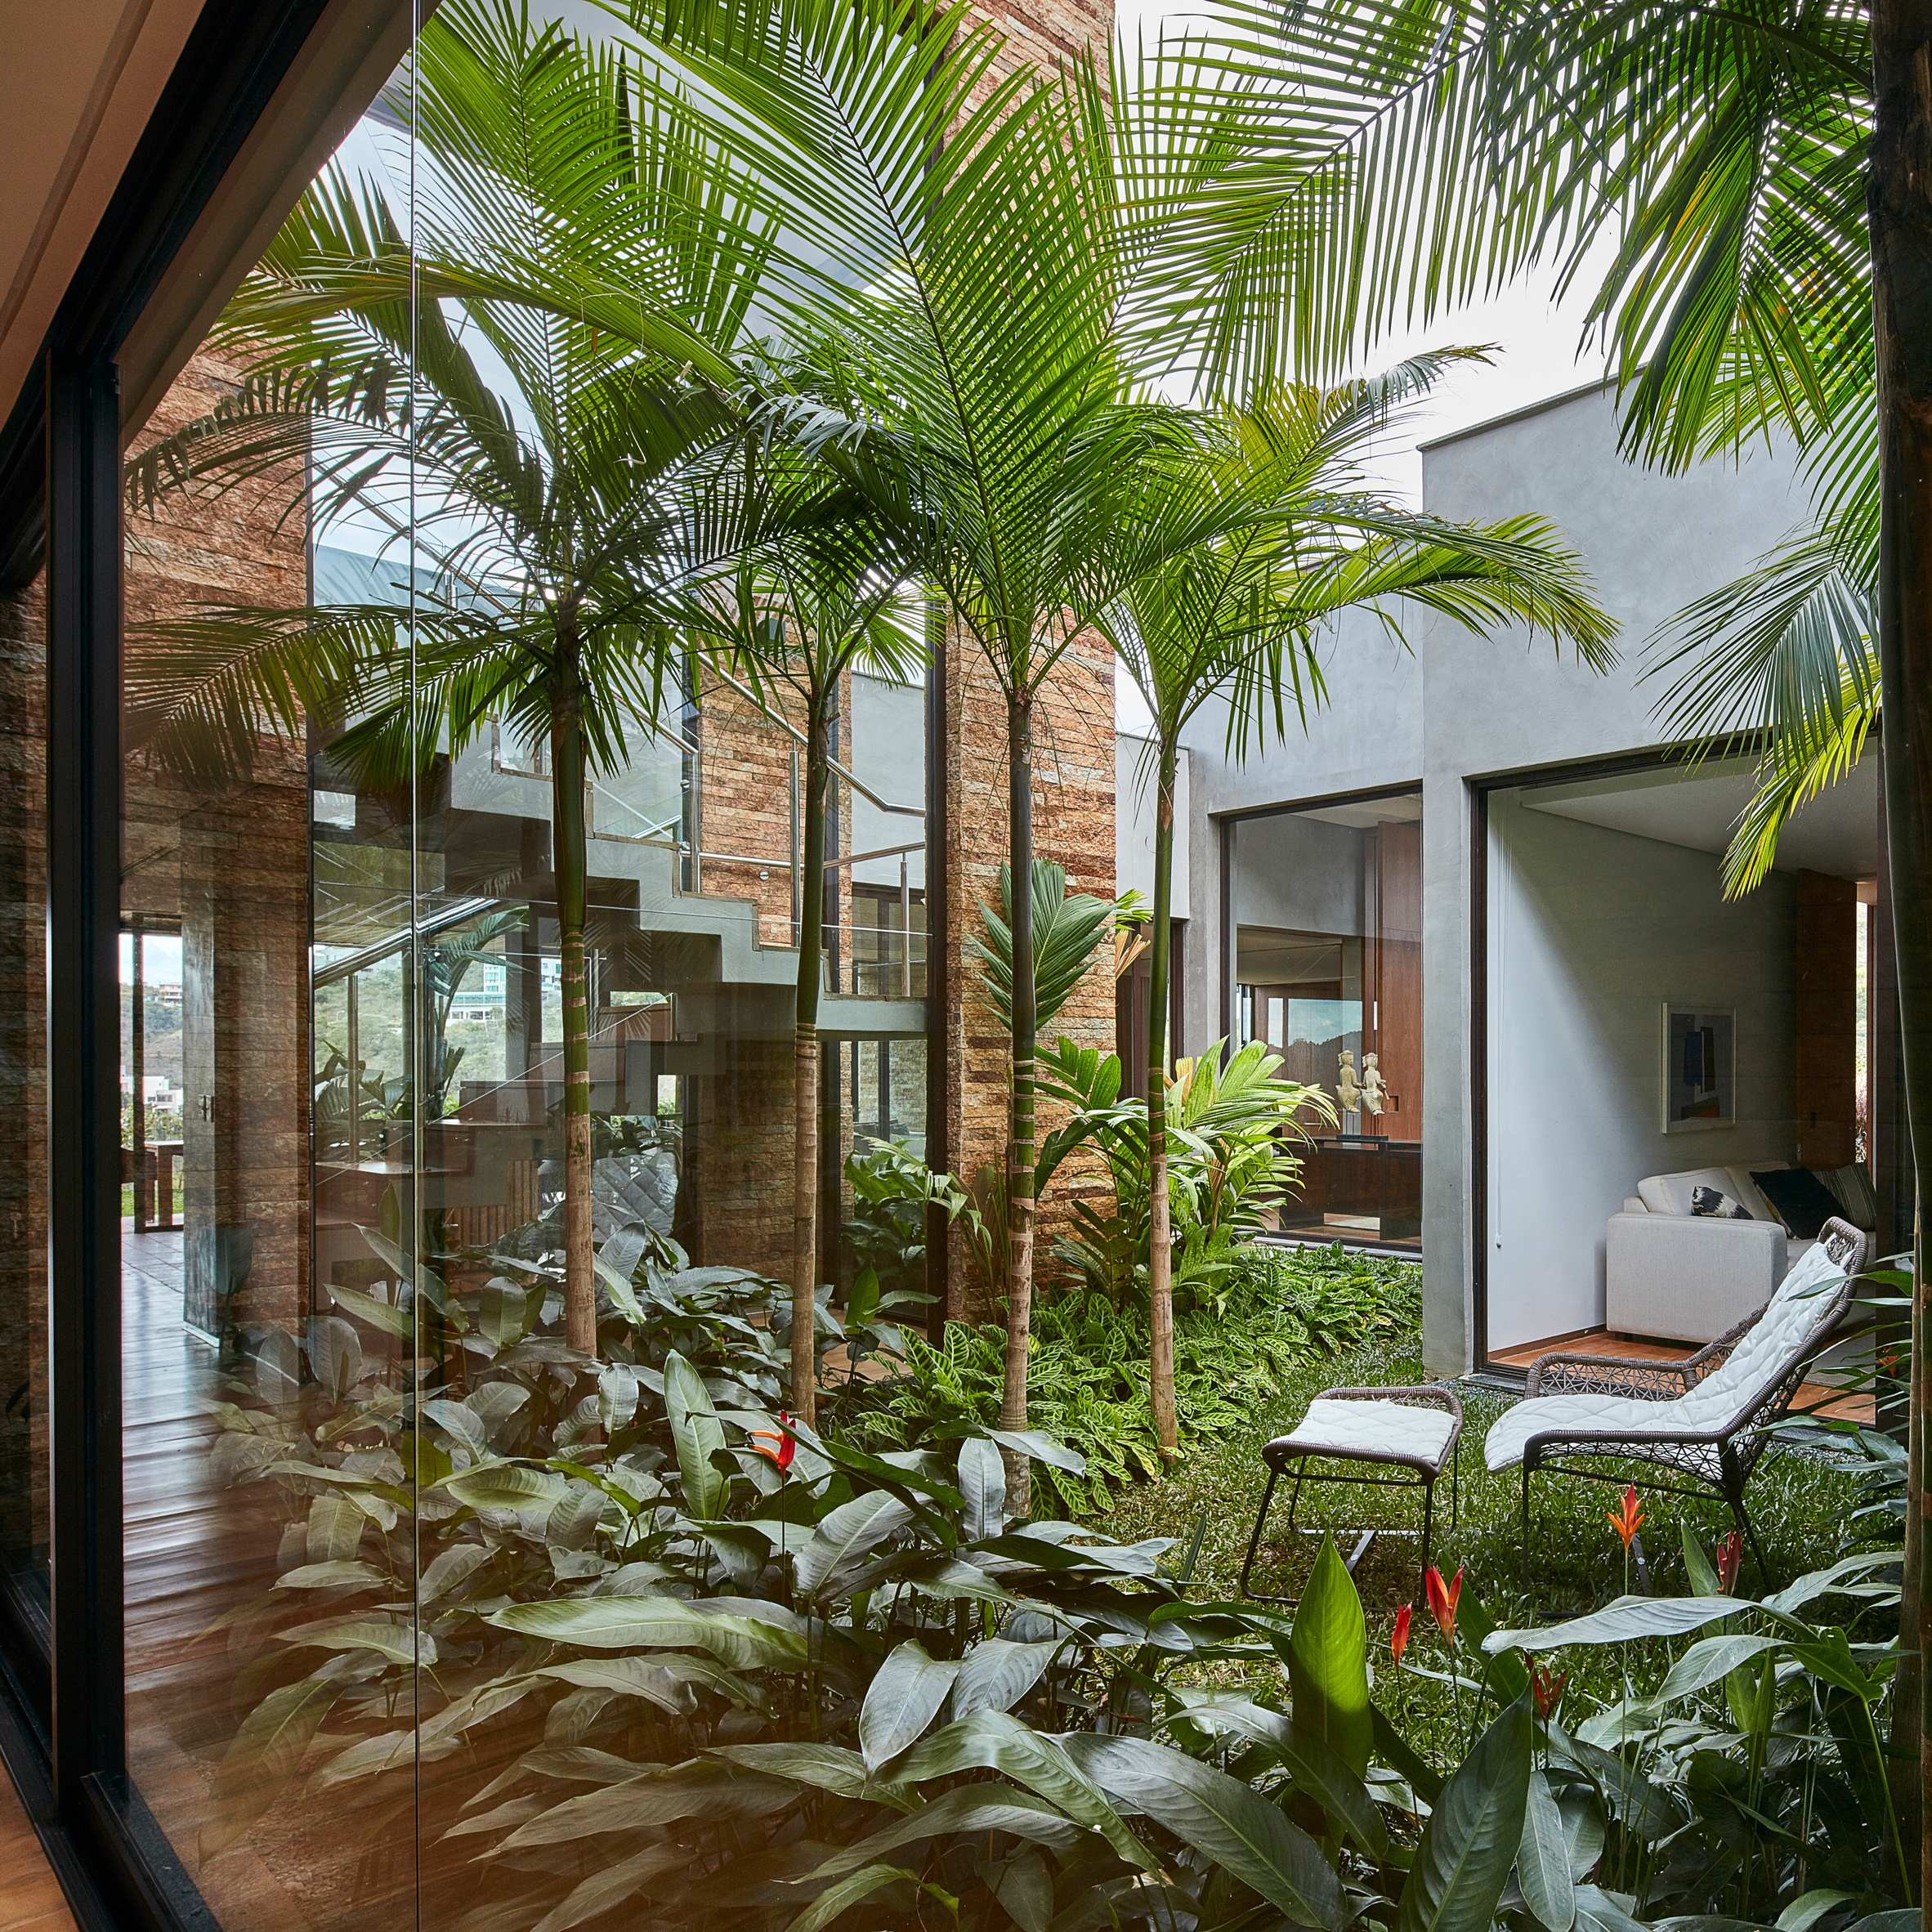 David Guerra Wraps Brazilian House Around Courtyard Filled With Tropical Plants